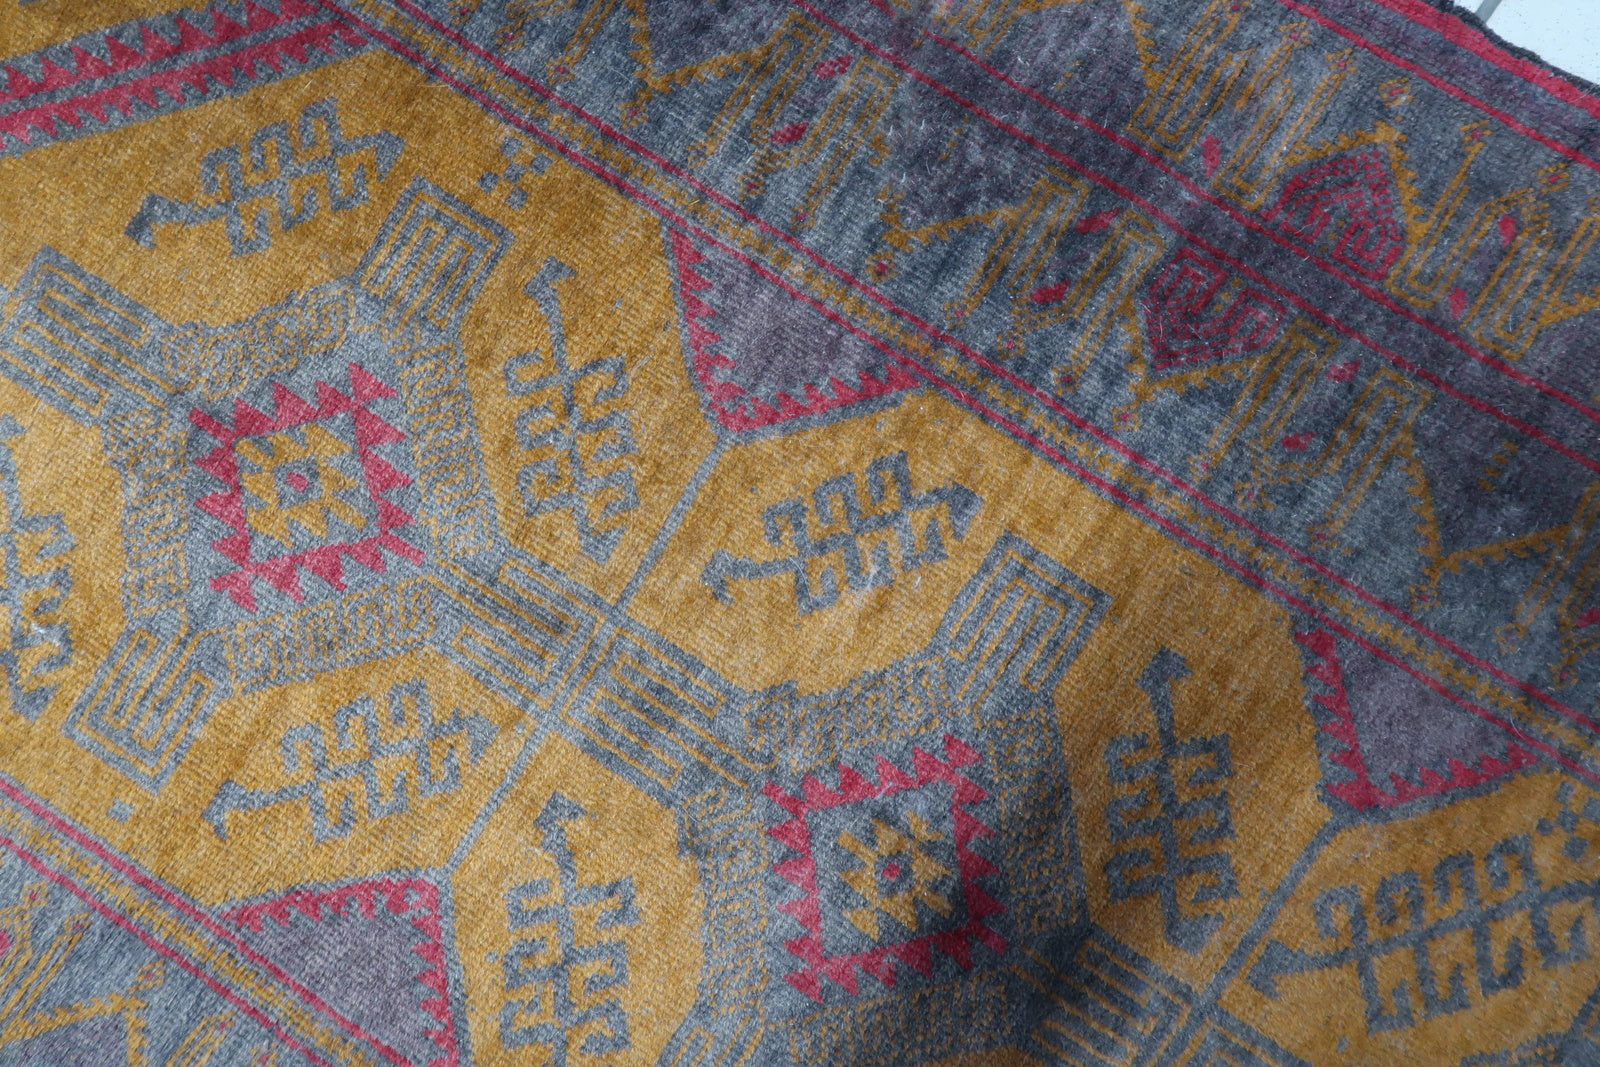 Detailed view of the orange accents and motifs on the Afghan Baluch rug